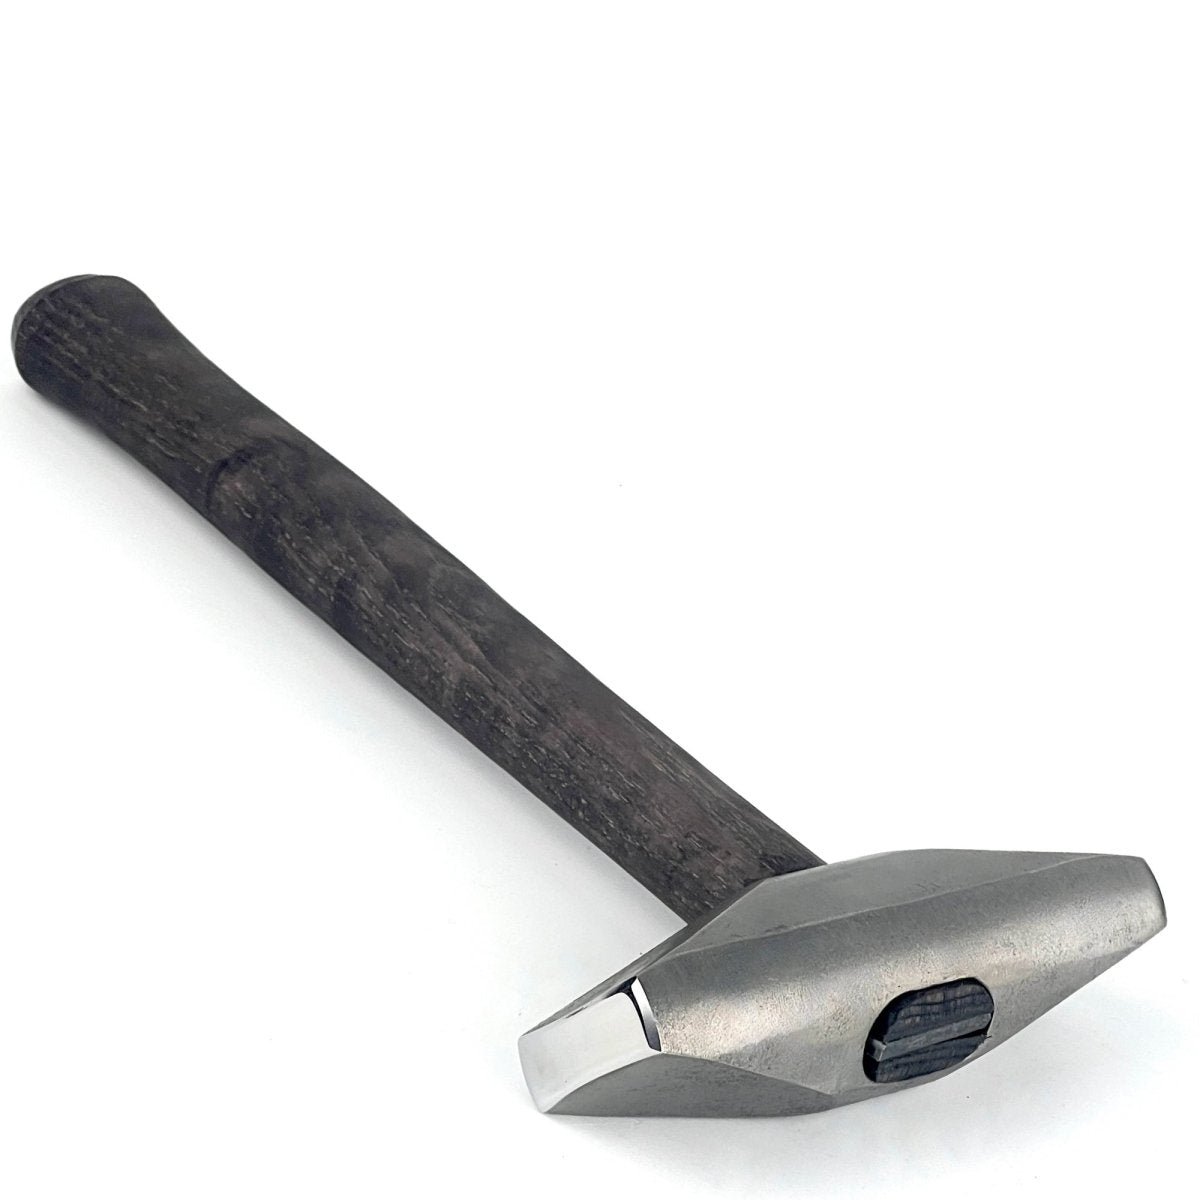 Hand forged double angle diagonal peen hammer from AncientSmithy